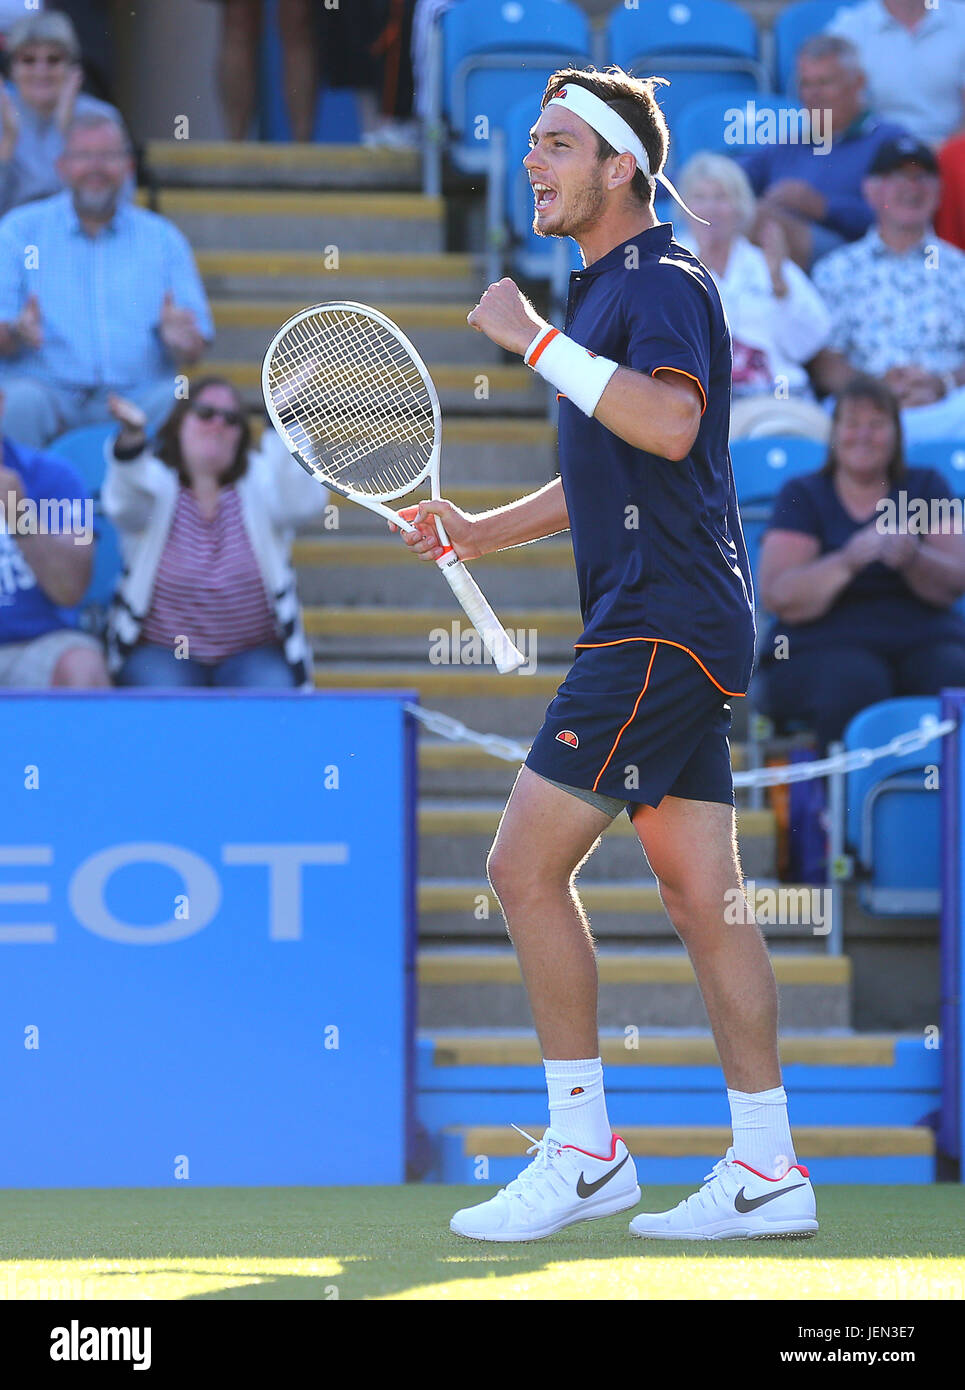 Eastbourne, UK. 26th June, 2017. Cameron Norrie of Great Britain celebrates after beating Horacio Zeballos of Argentina during day two of the Aegon International Eastbourne on June 26, 2017 in Eastbourne, England Credit: Paul Terry Photo/Alamy Live News Stock Photo